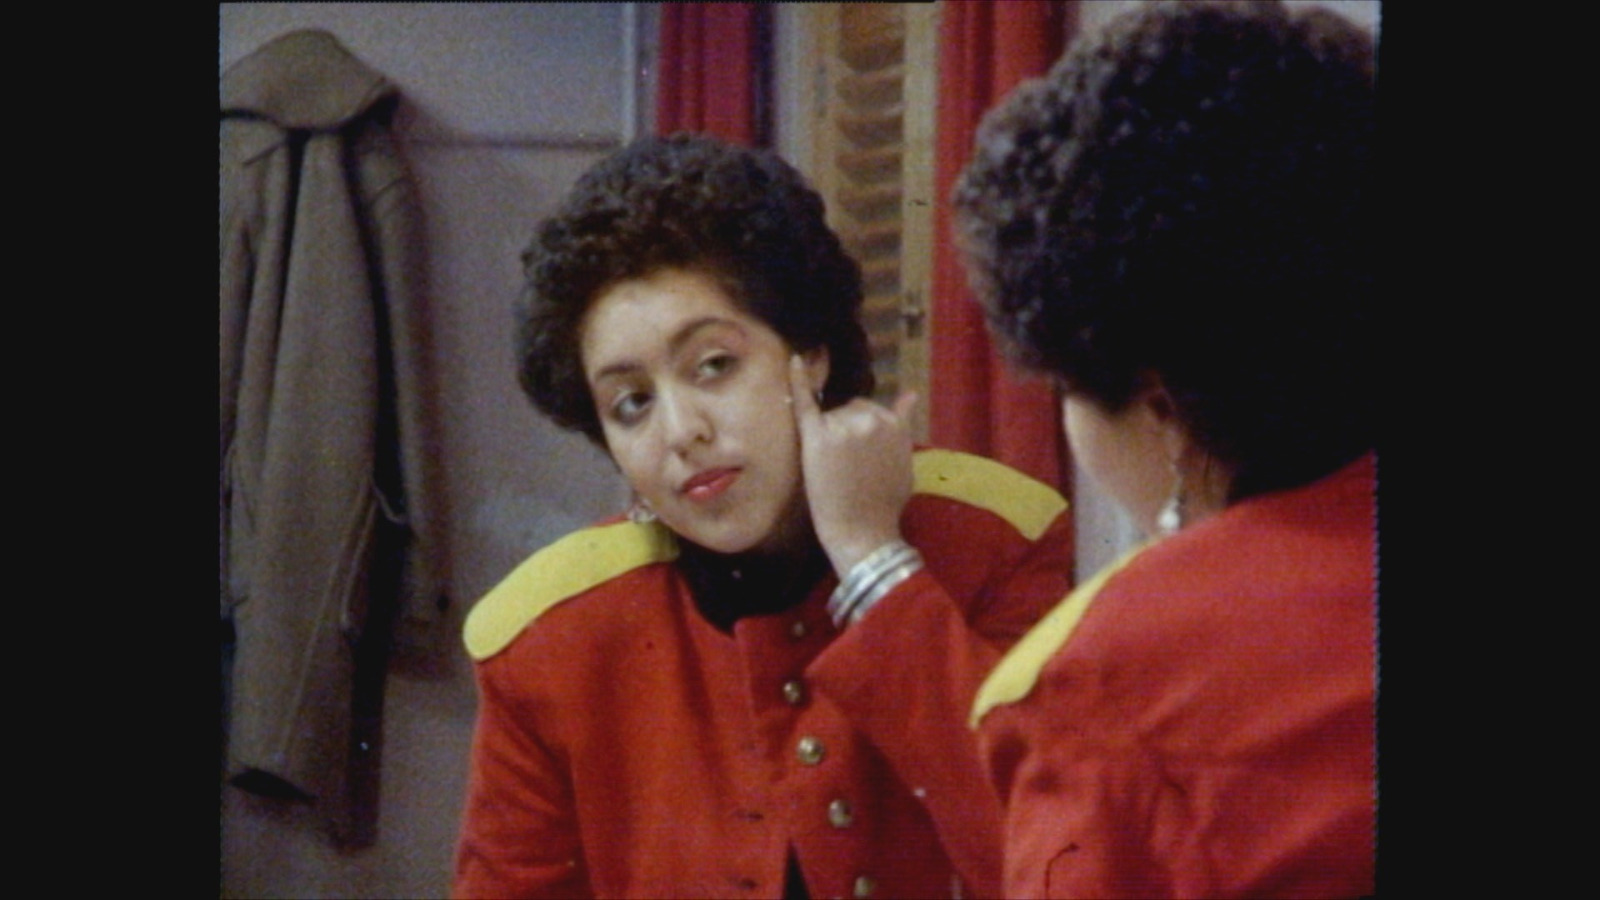 Poly Styrene in red army jacket putting on make up in the mirror.